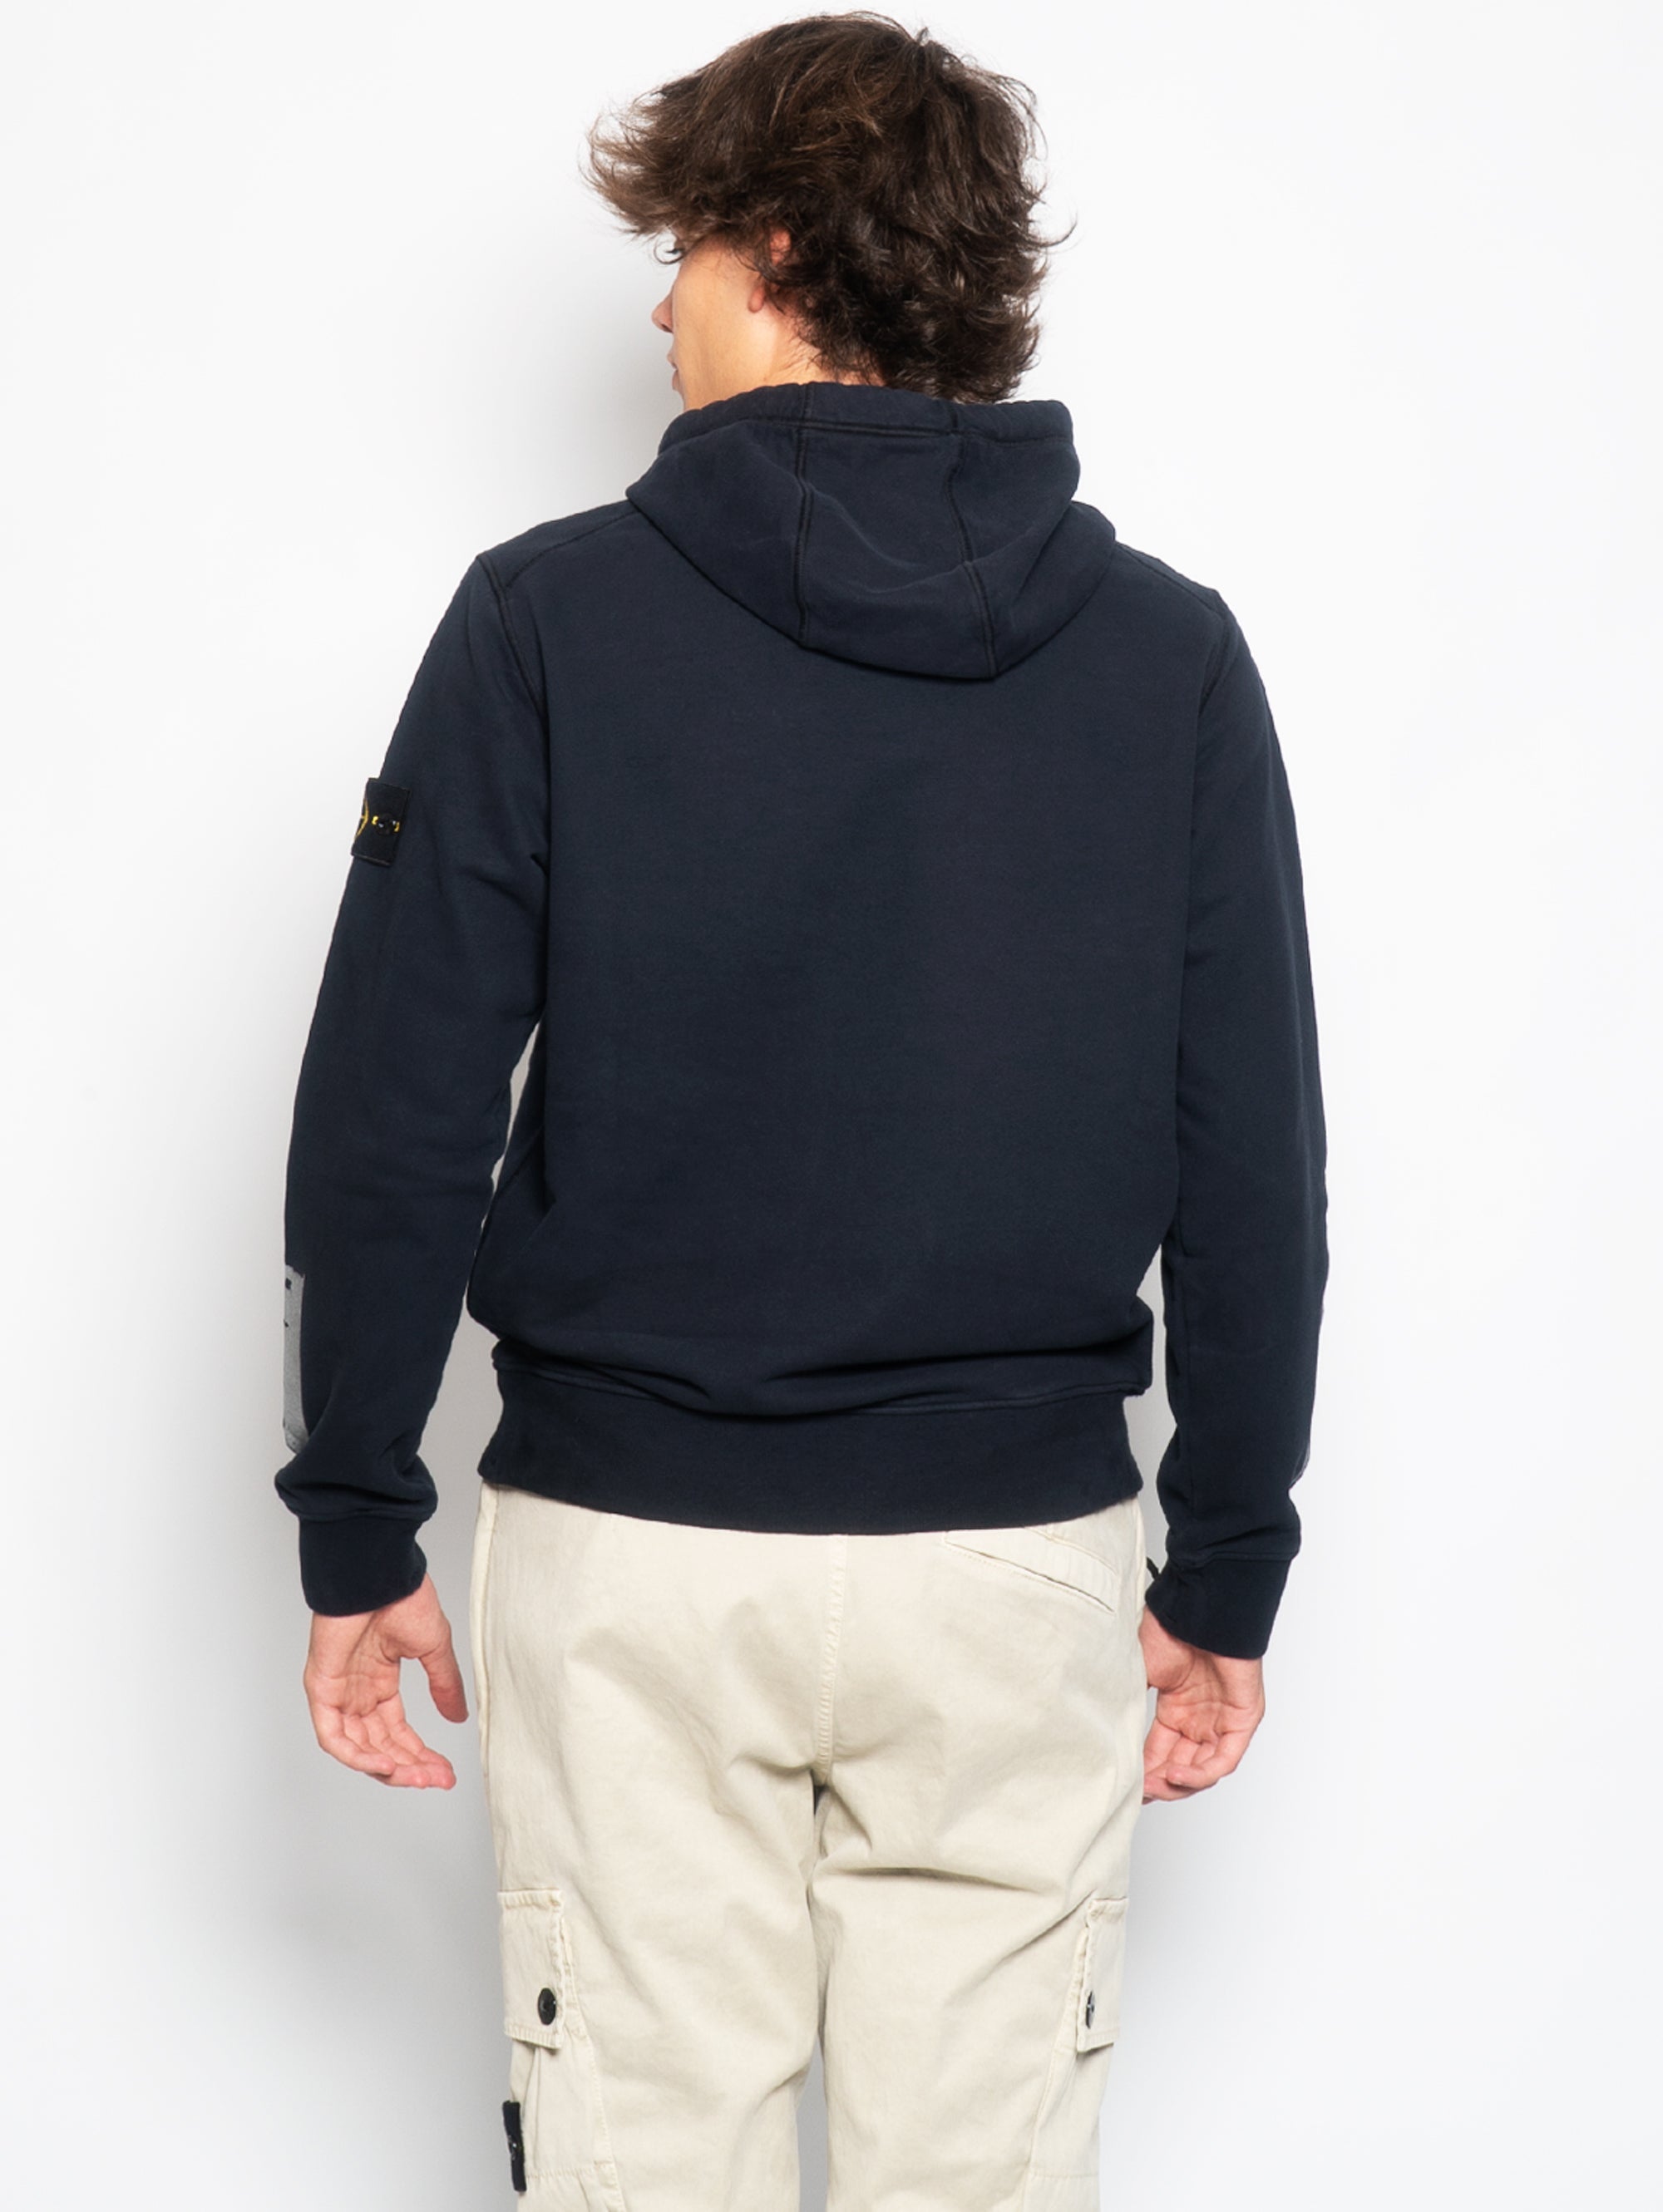 Hooded Sweatshirt with Reflective Blue Details